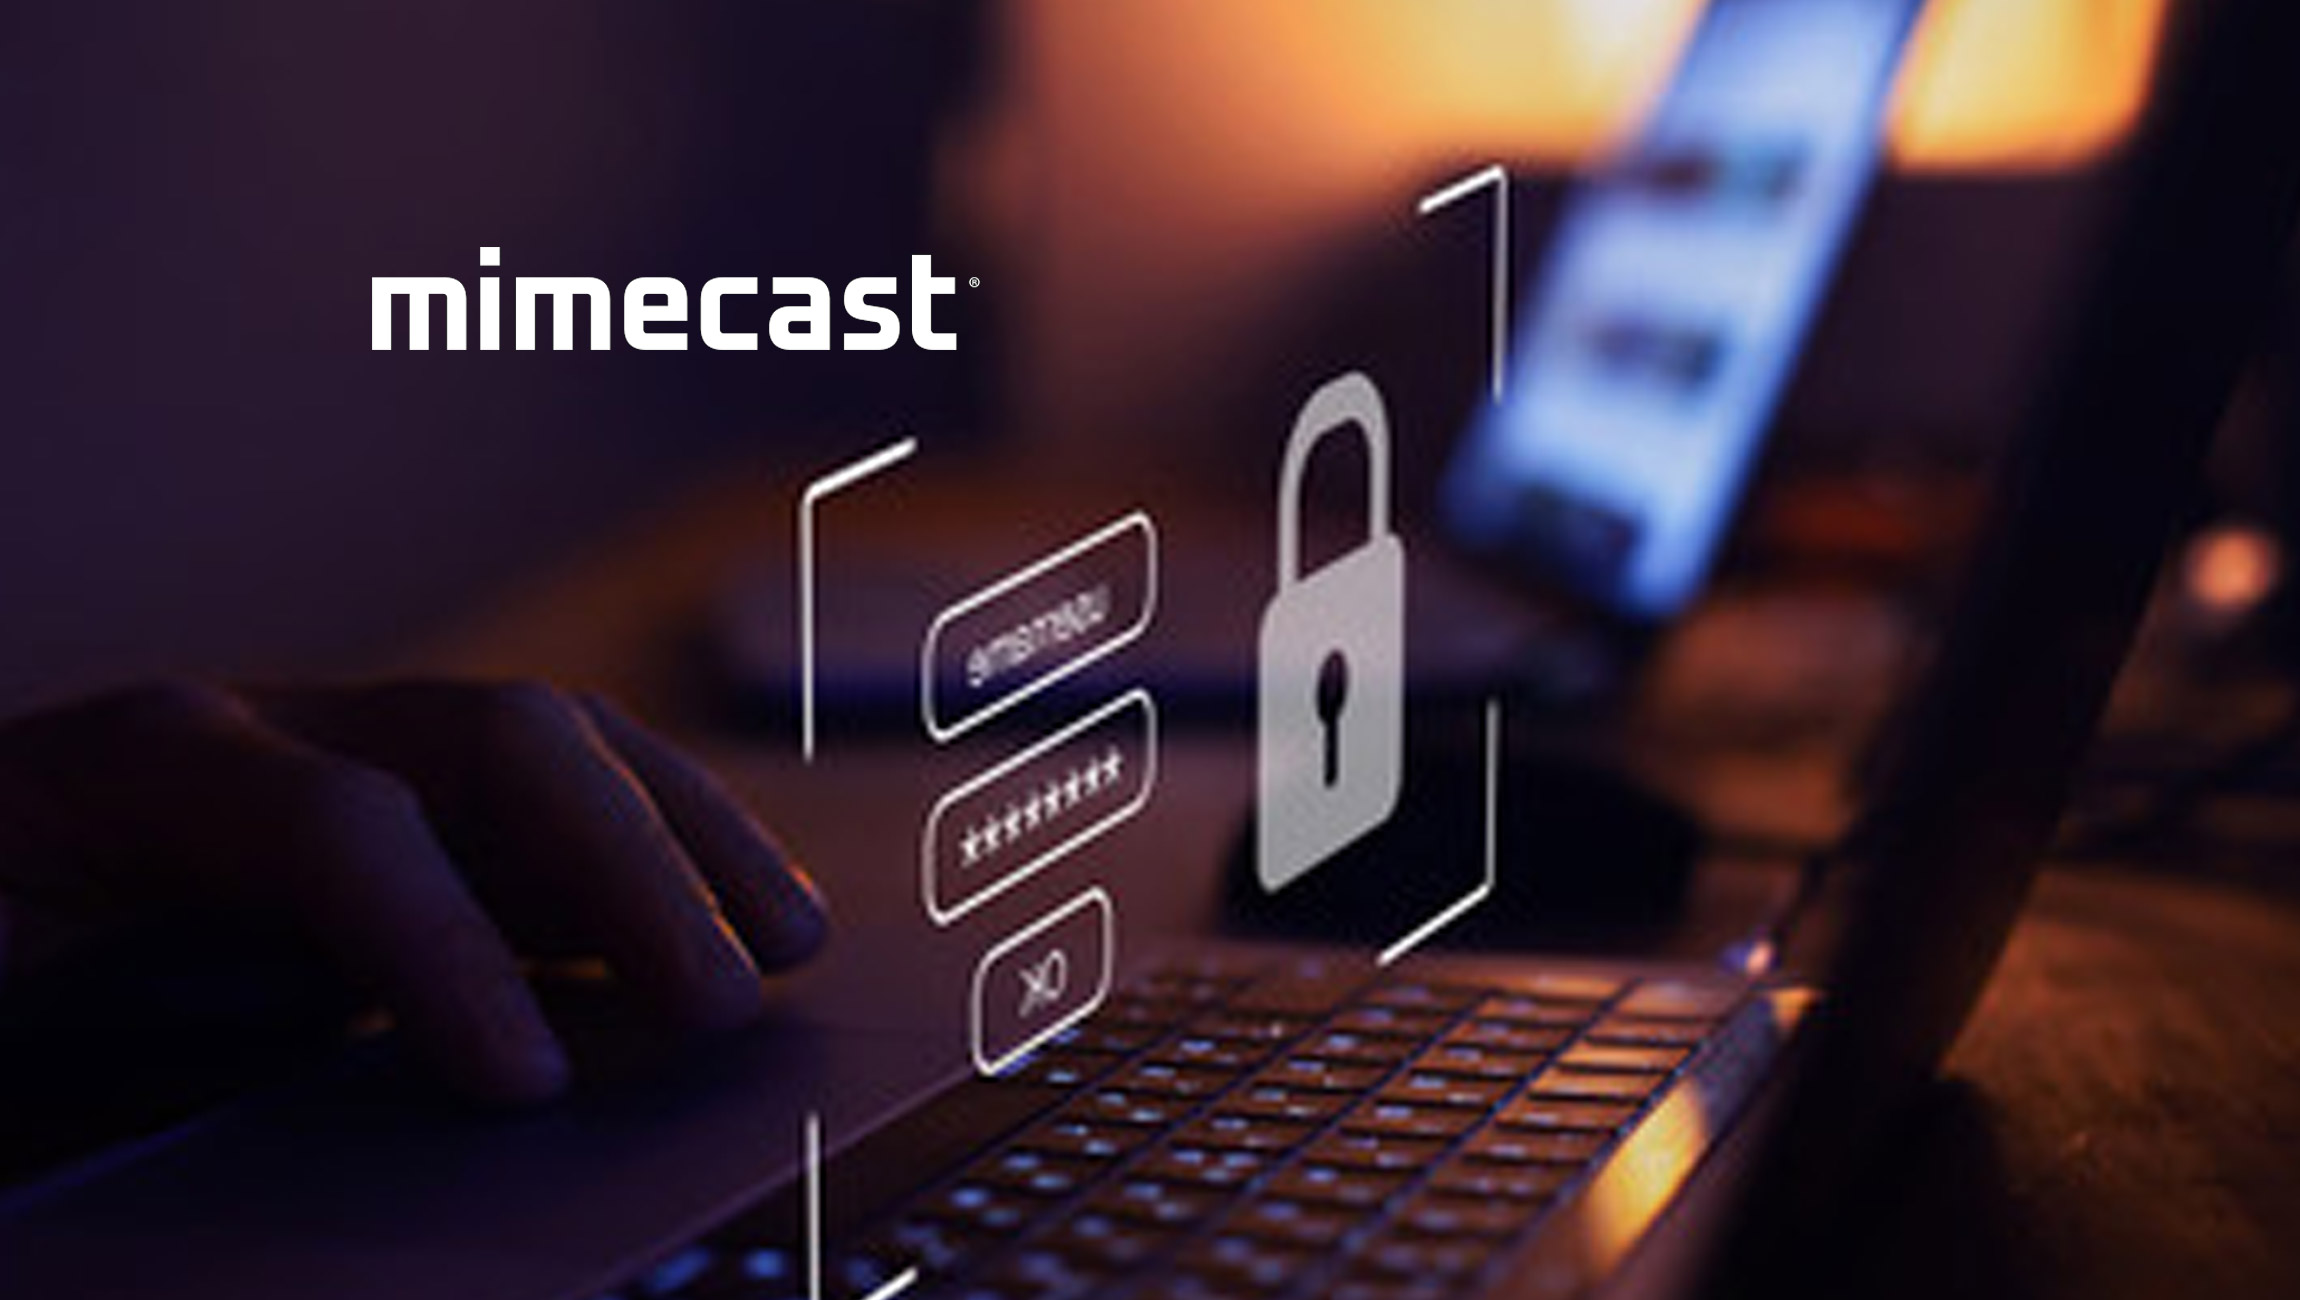 Advanced email and collaboration security company, Mimecast have completed the acquisition of Elevate Security